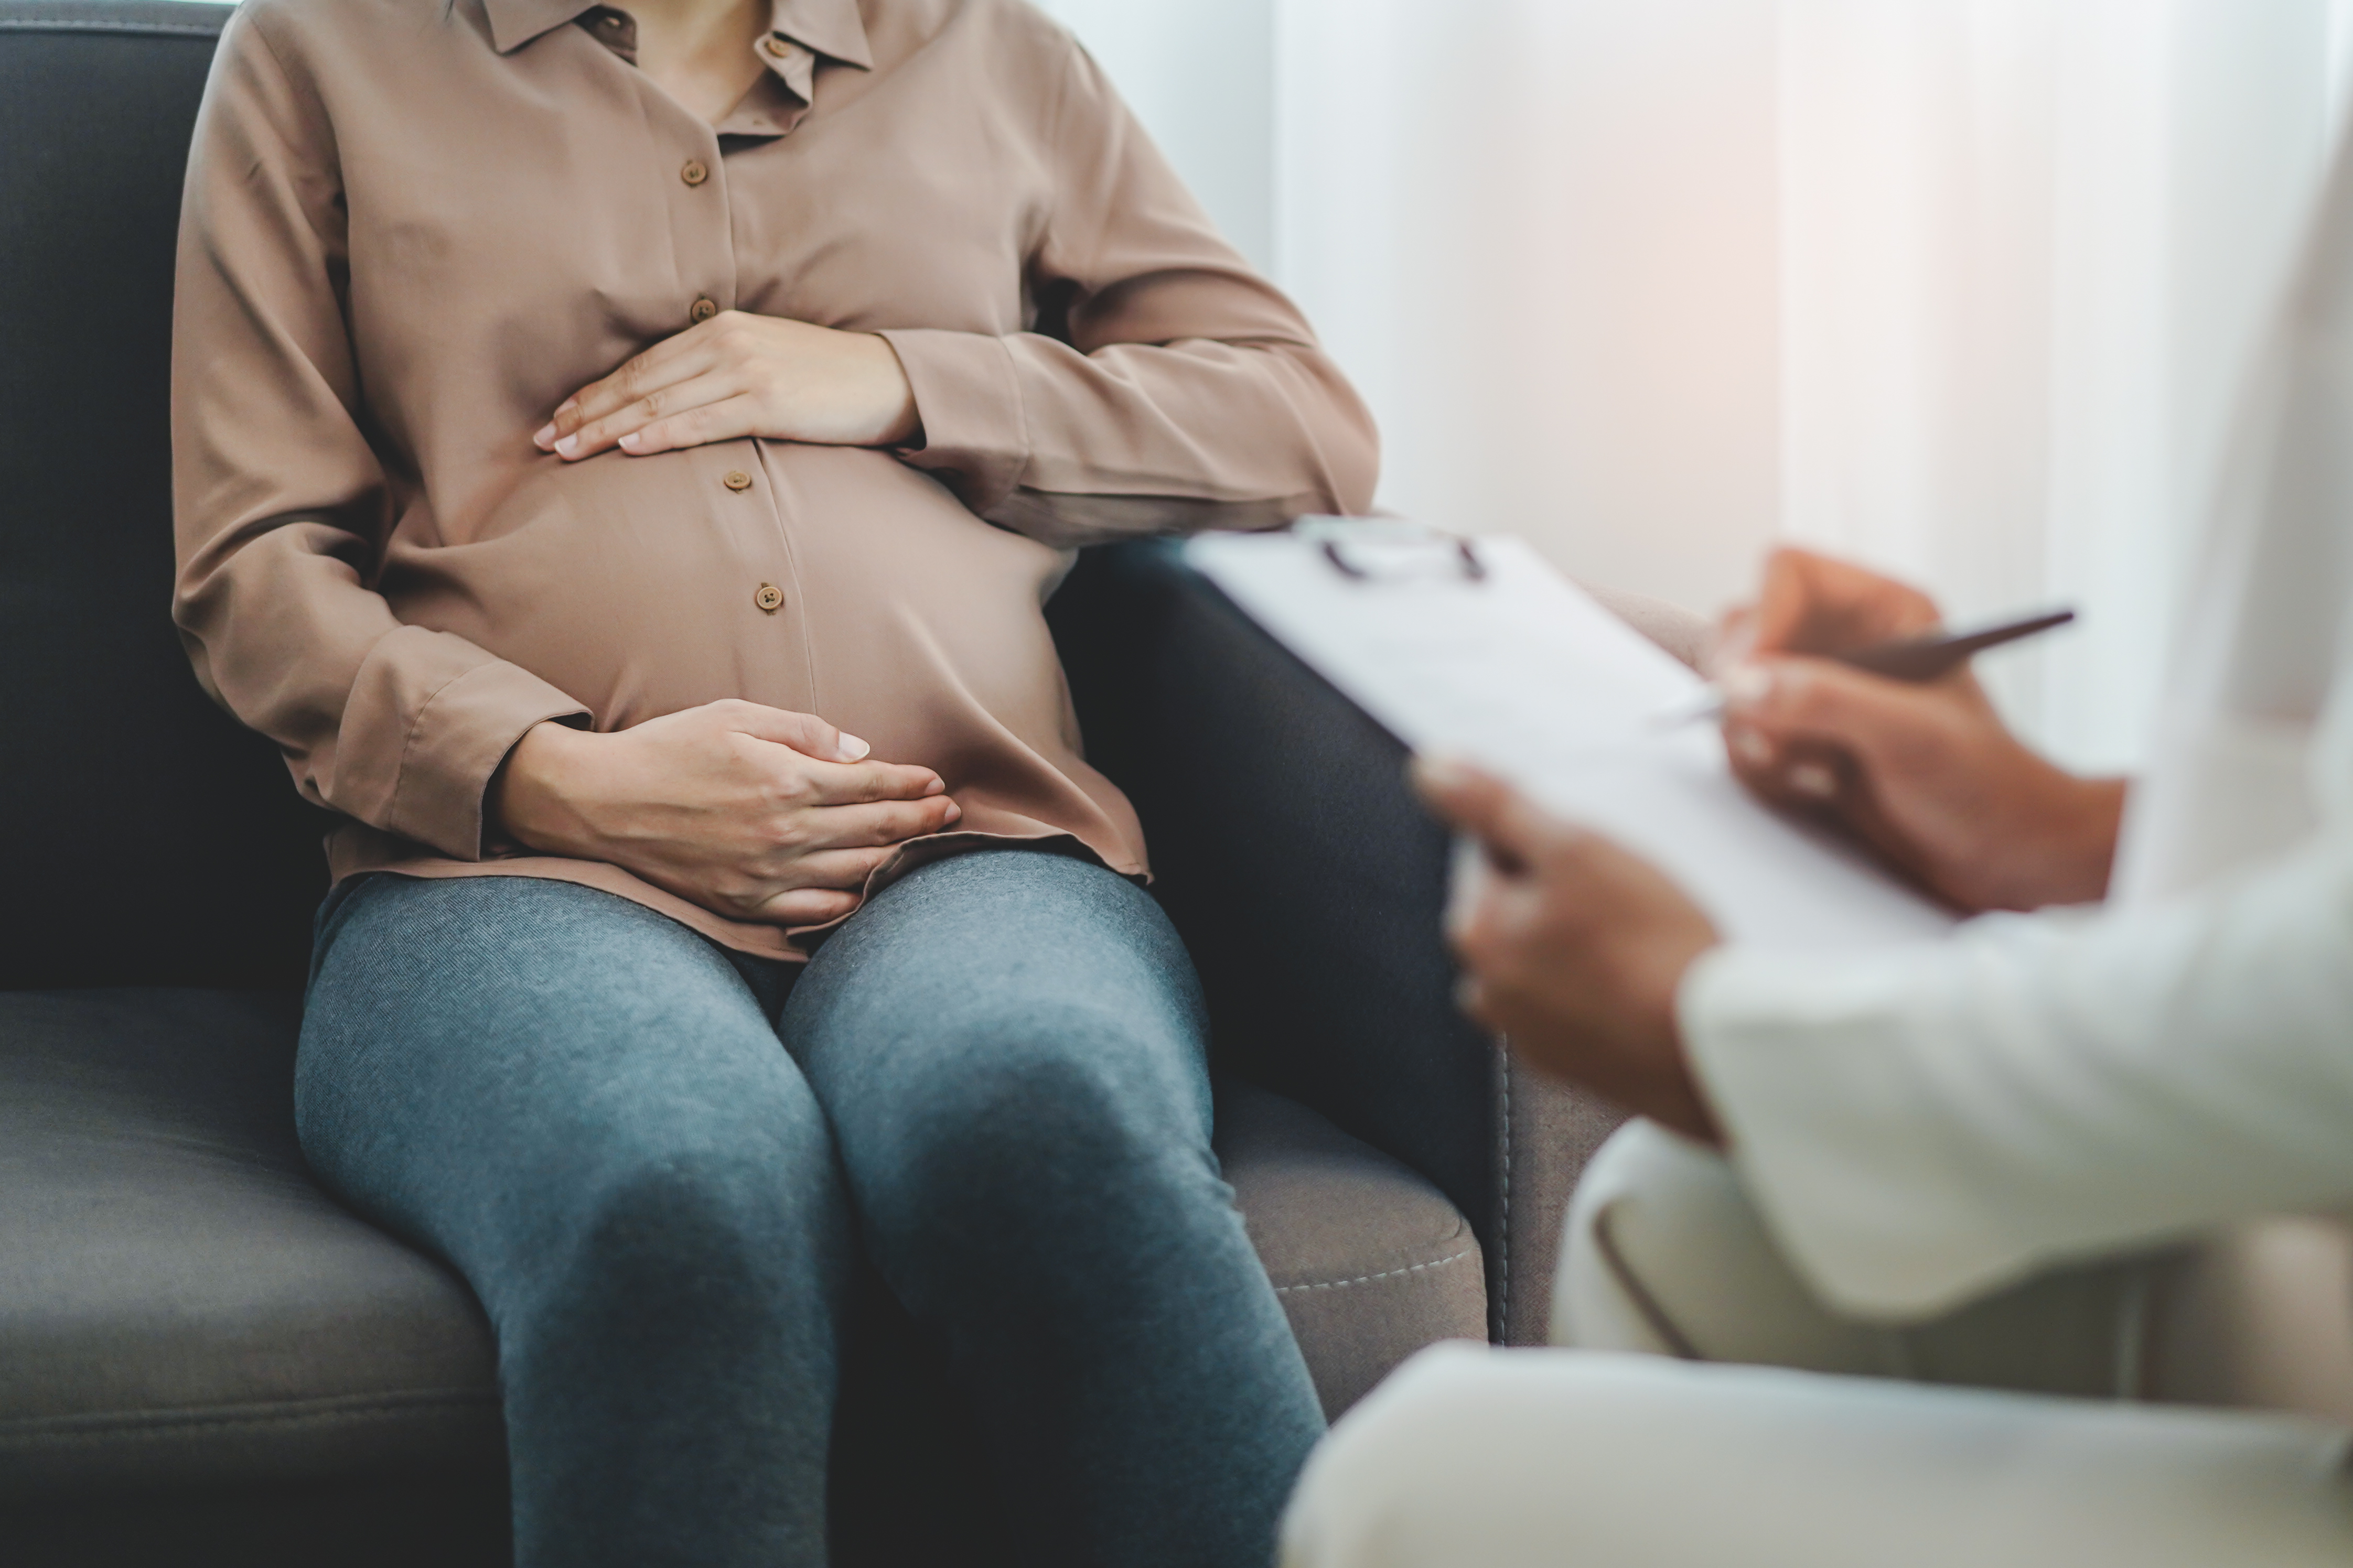 A pregnant woman at the doctor | Source: Shutterstock